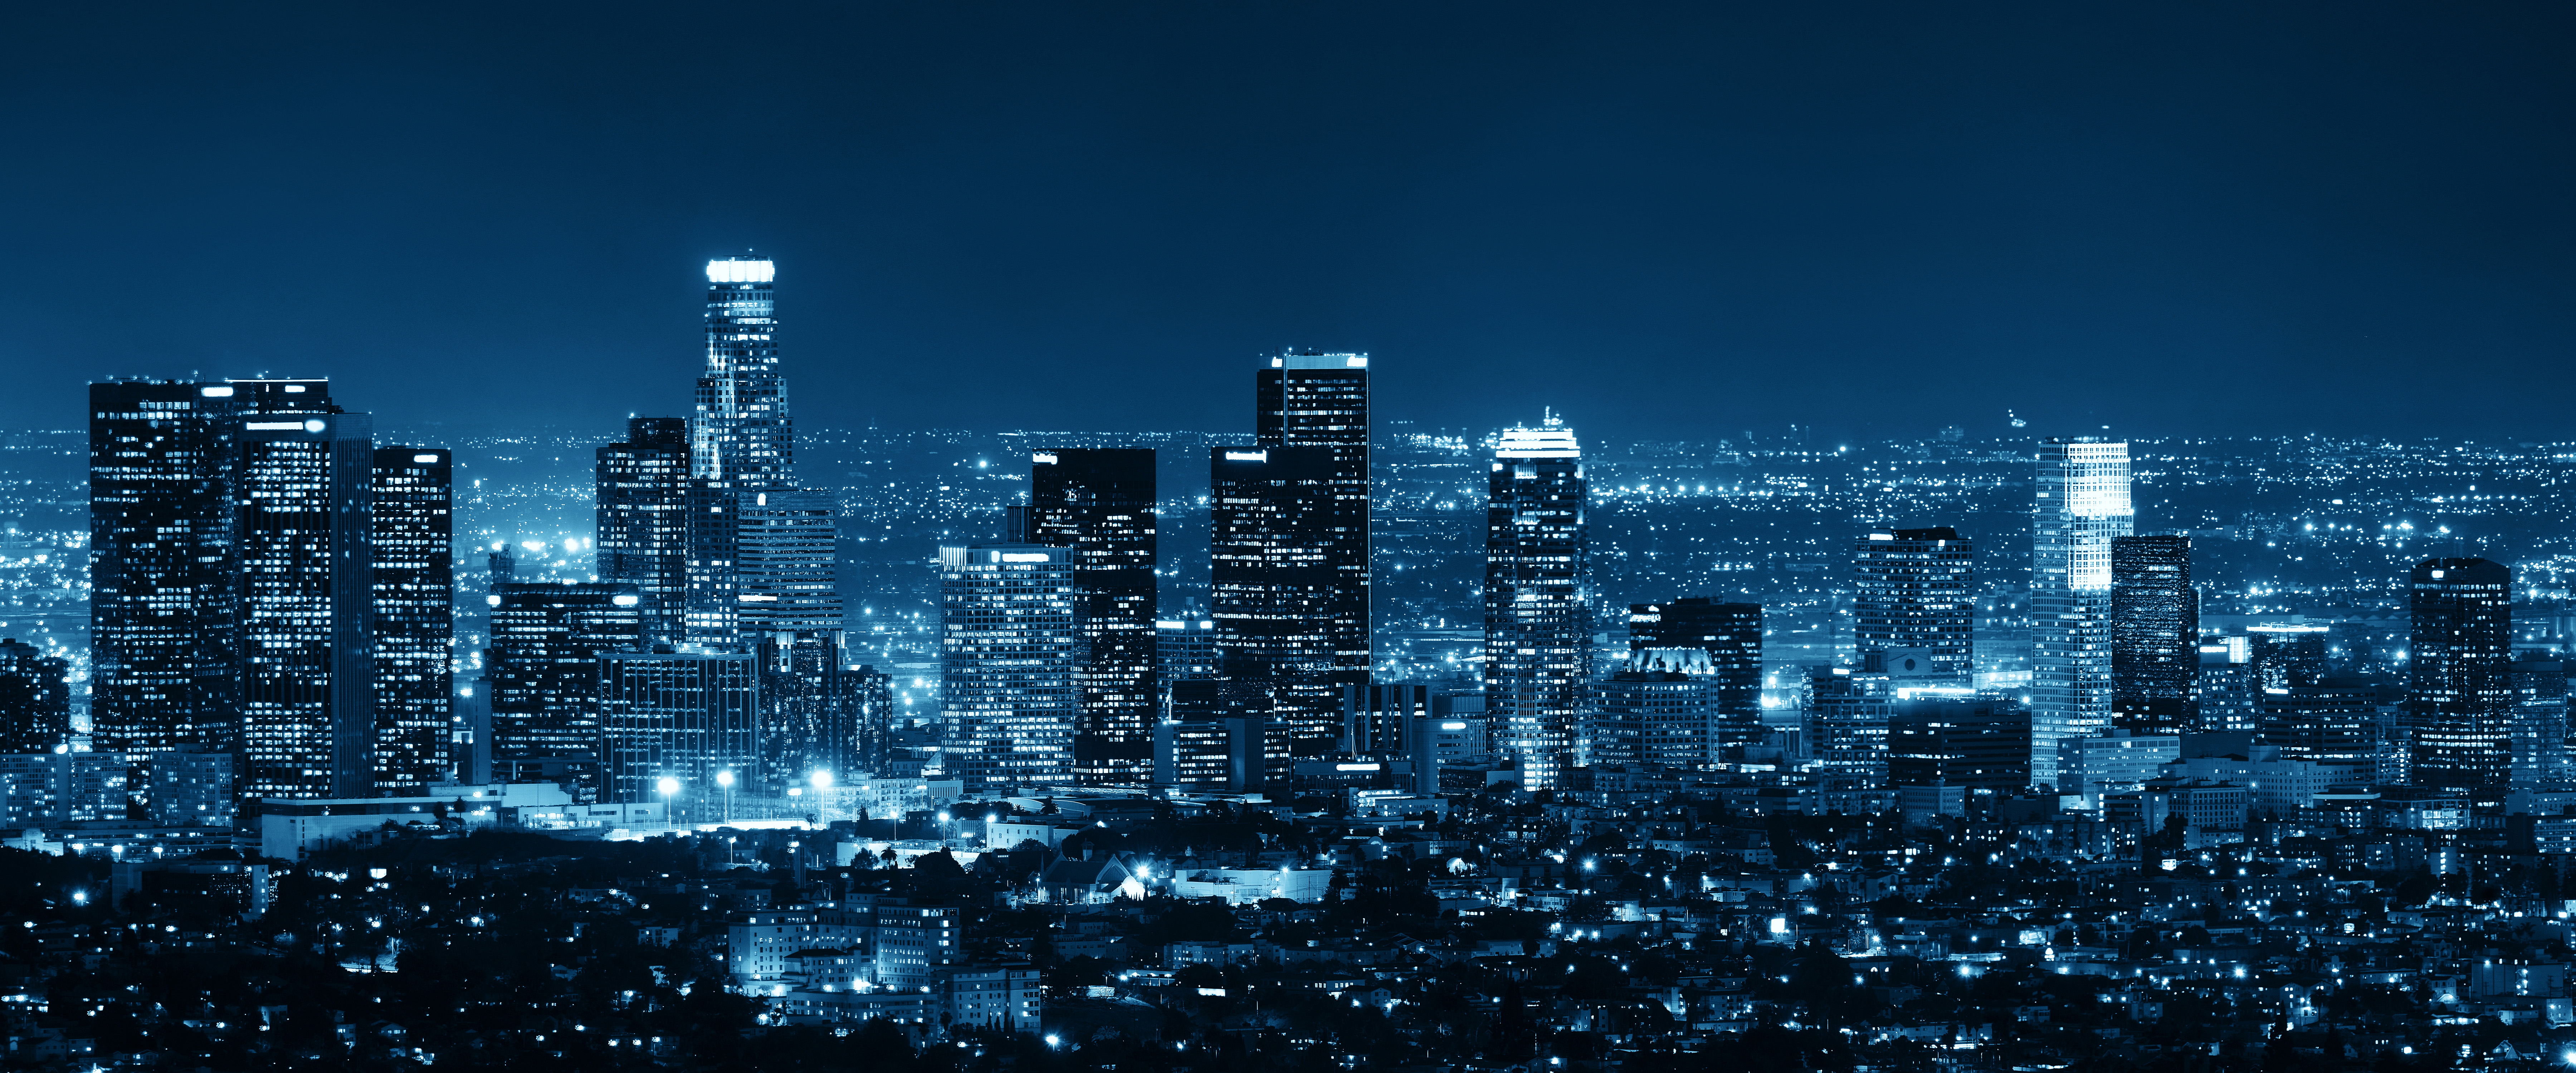 Mobile wallpaper: Cities, Night, City, Light, Los Angeles, Man Made,  1149428 download the picture for free.